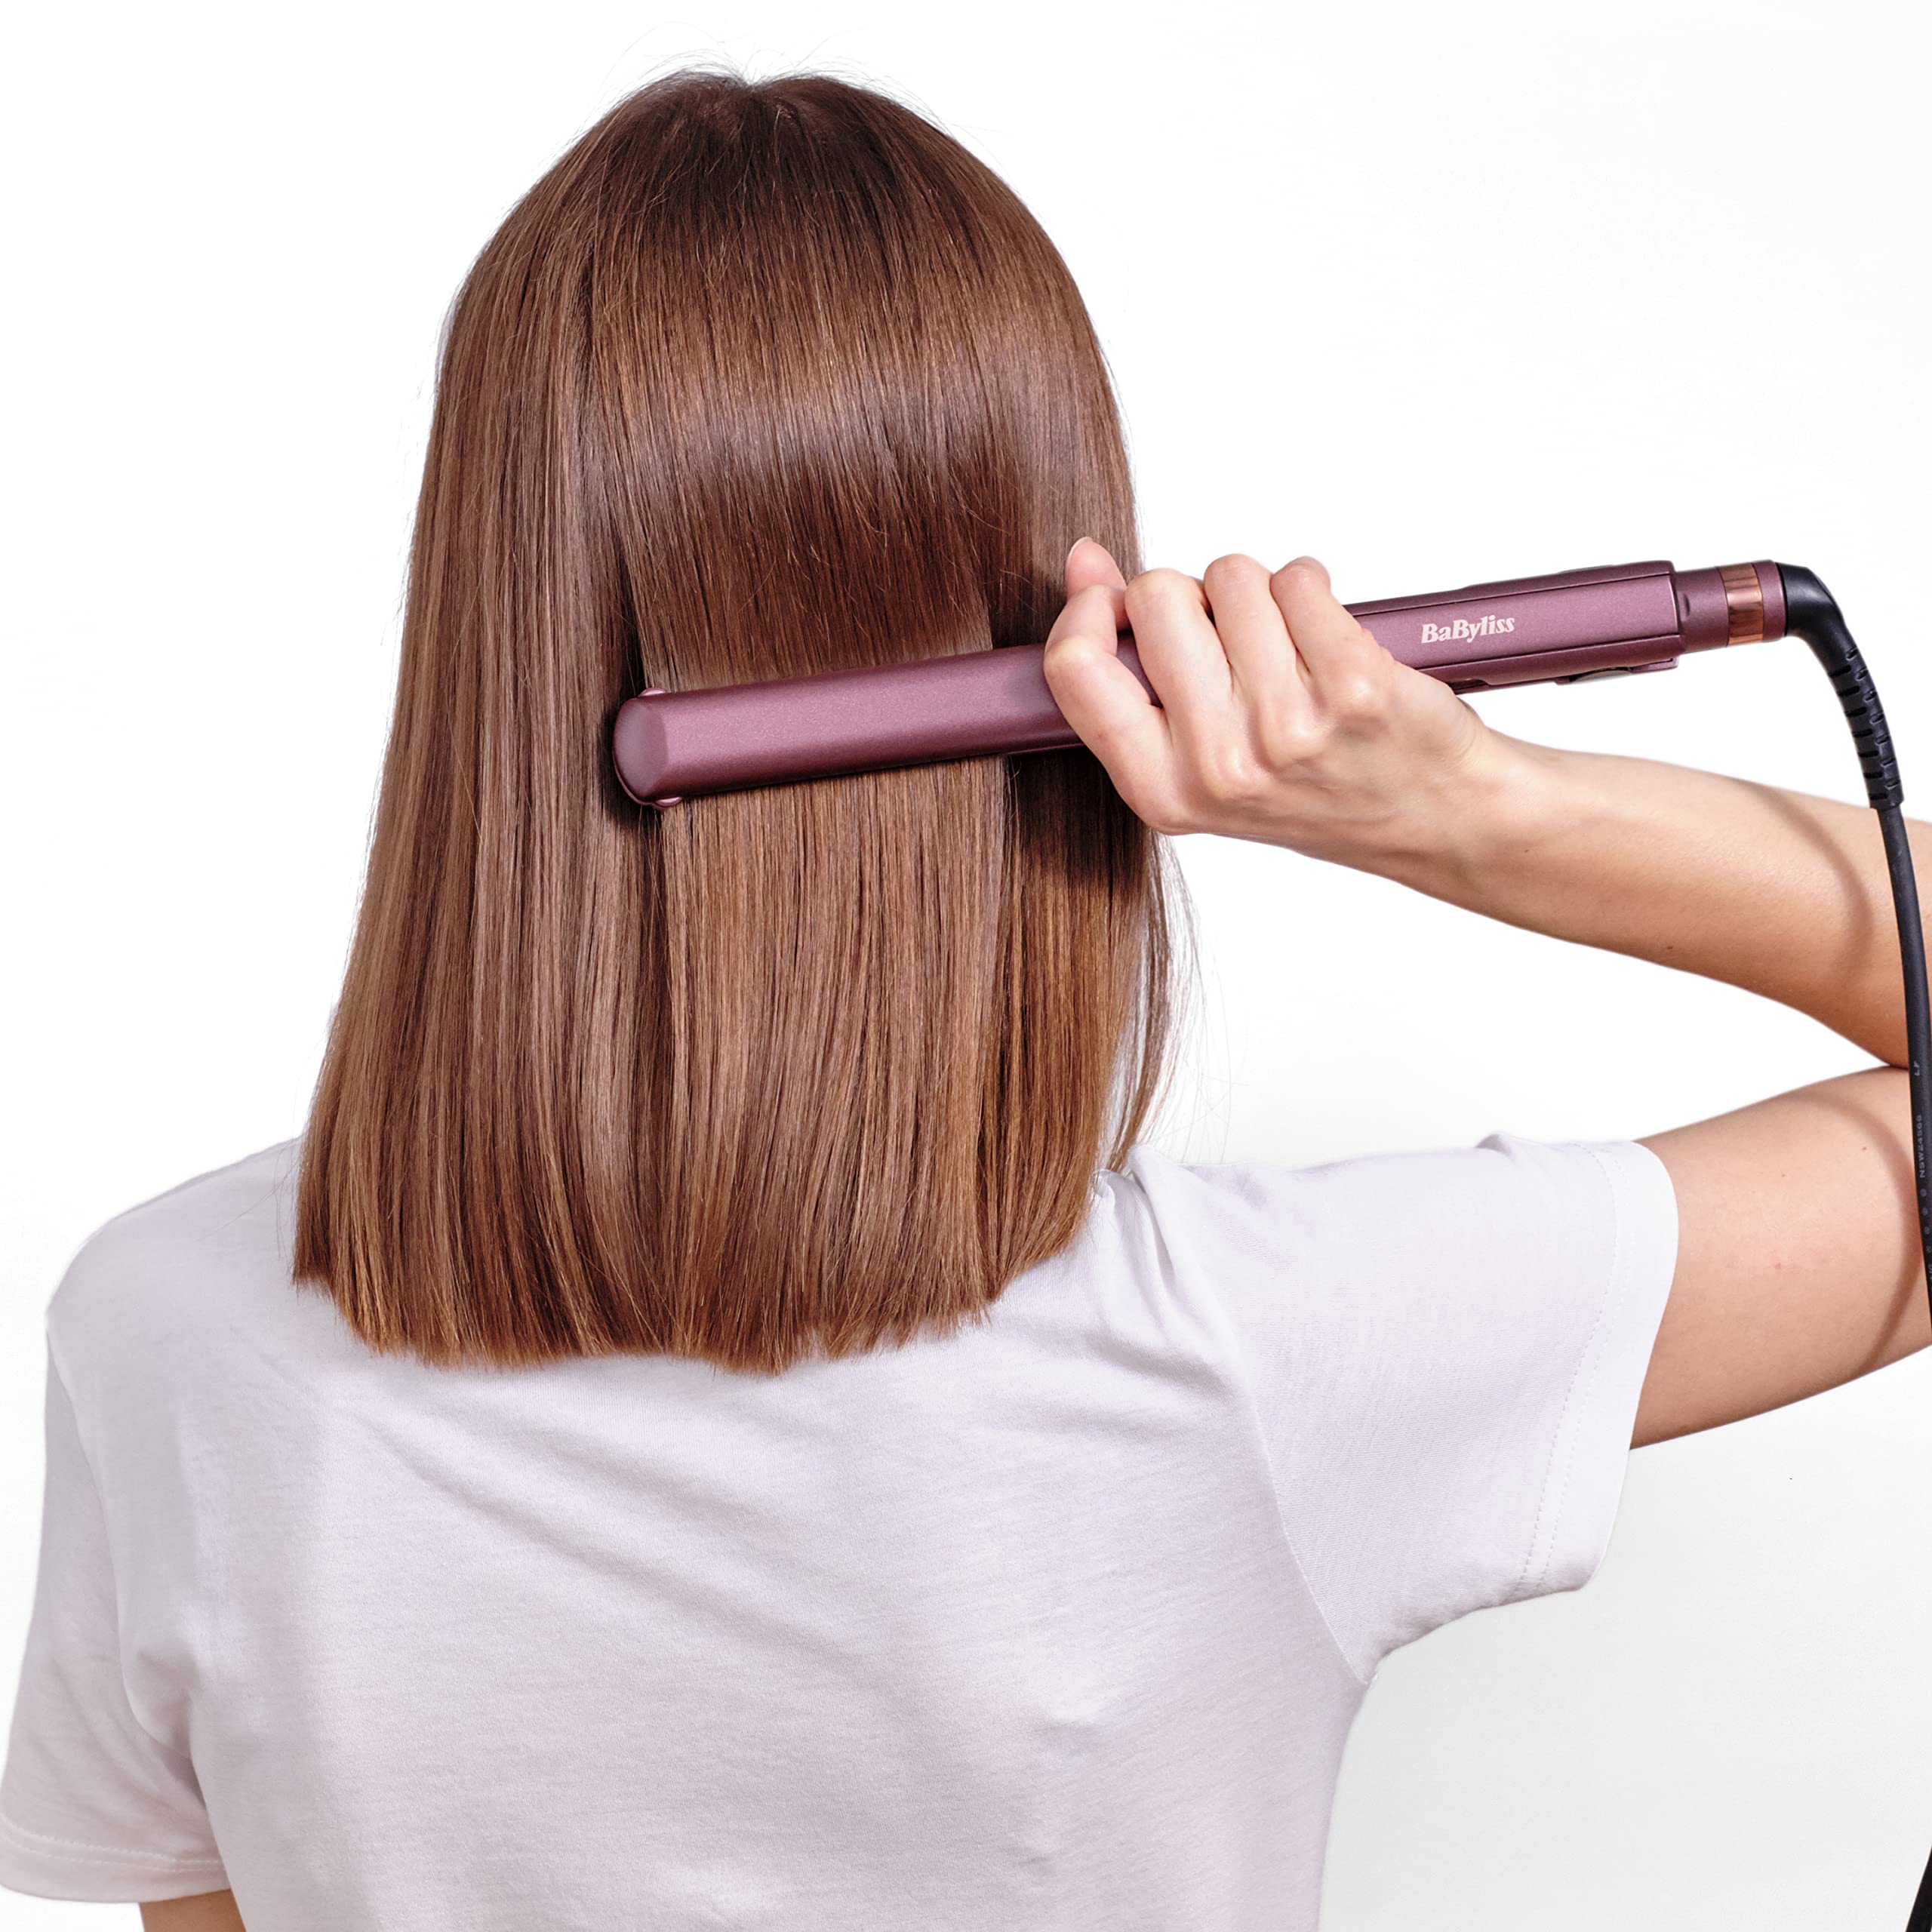 BaByliss Berry Crush 230 Hair Straightener| 10 Heat Settings From 140c - 230c For Use On All Hair Types l Long Length 3m Swivel Cord | Long Length Plates For Fast Smooth Styling | 2183PSDE(Brown)